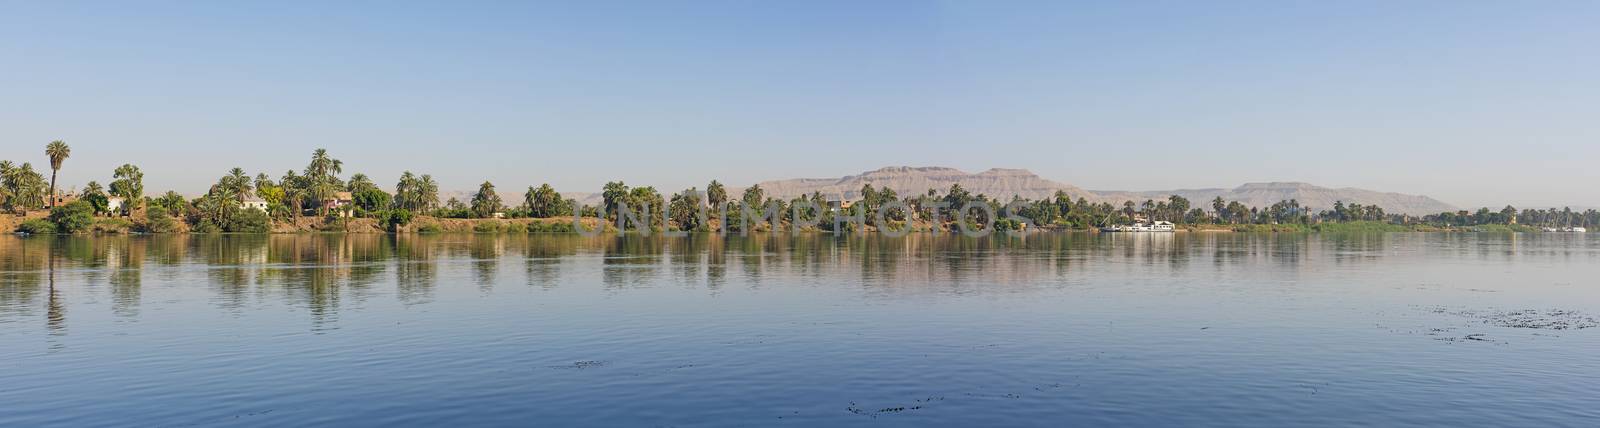 View of river nile in Egypt showing Luxor west bank by paulvinten